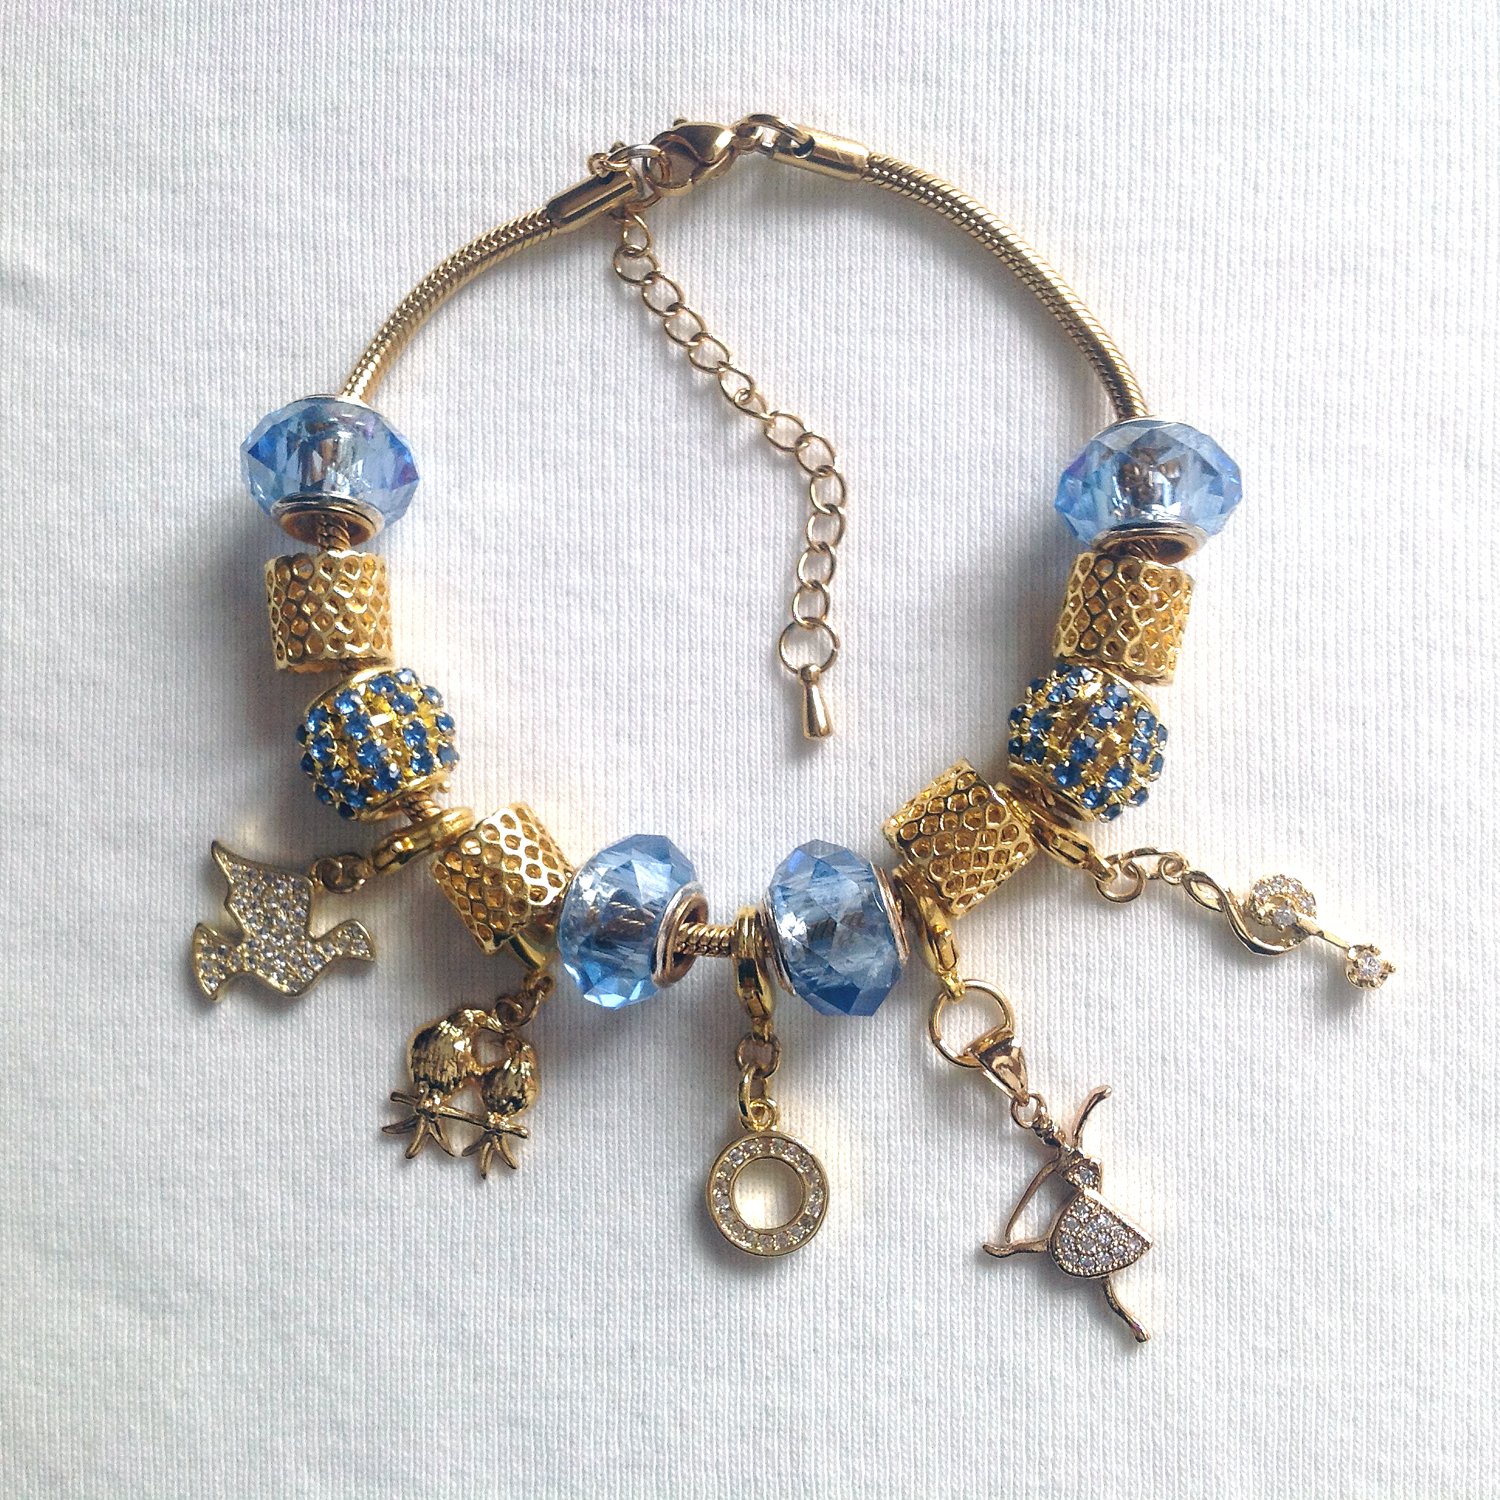 Days of Christmas Cubic Zirconia European Style Charm Bracelet in Gold, Cornflower Blue and White